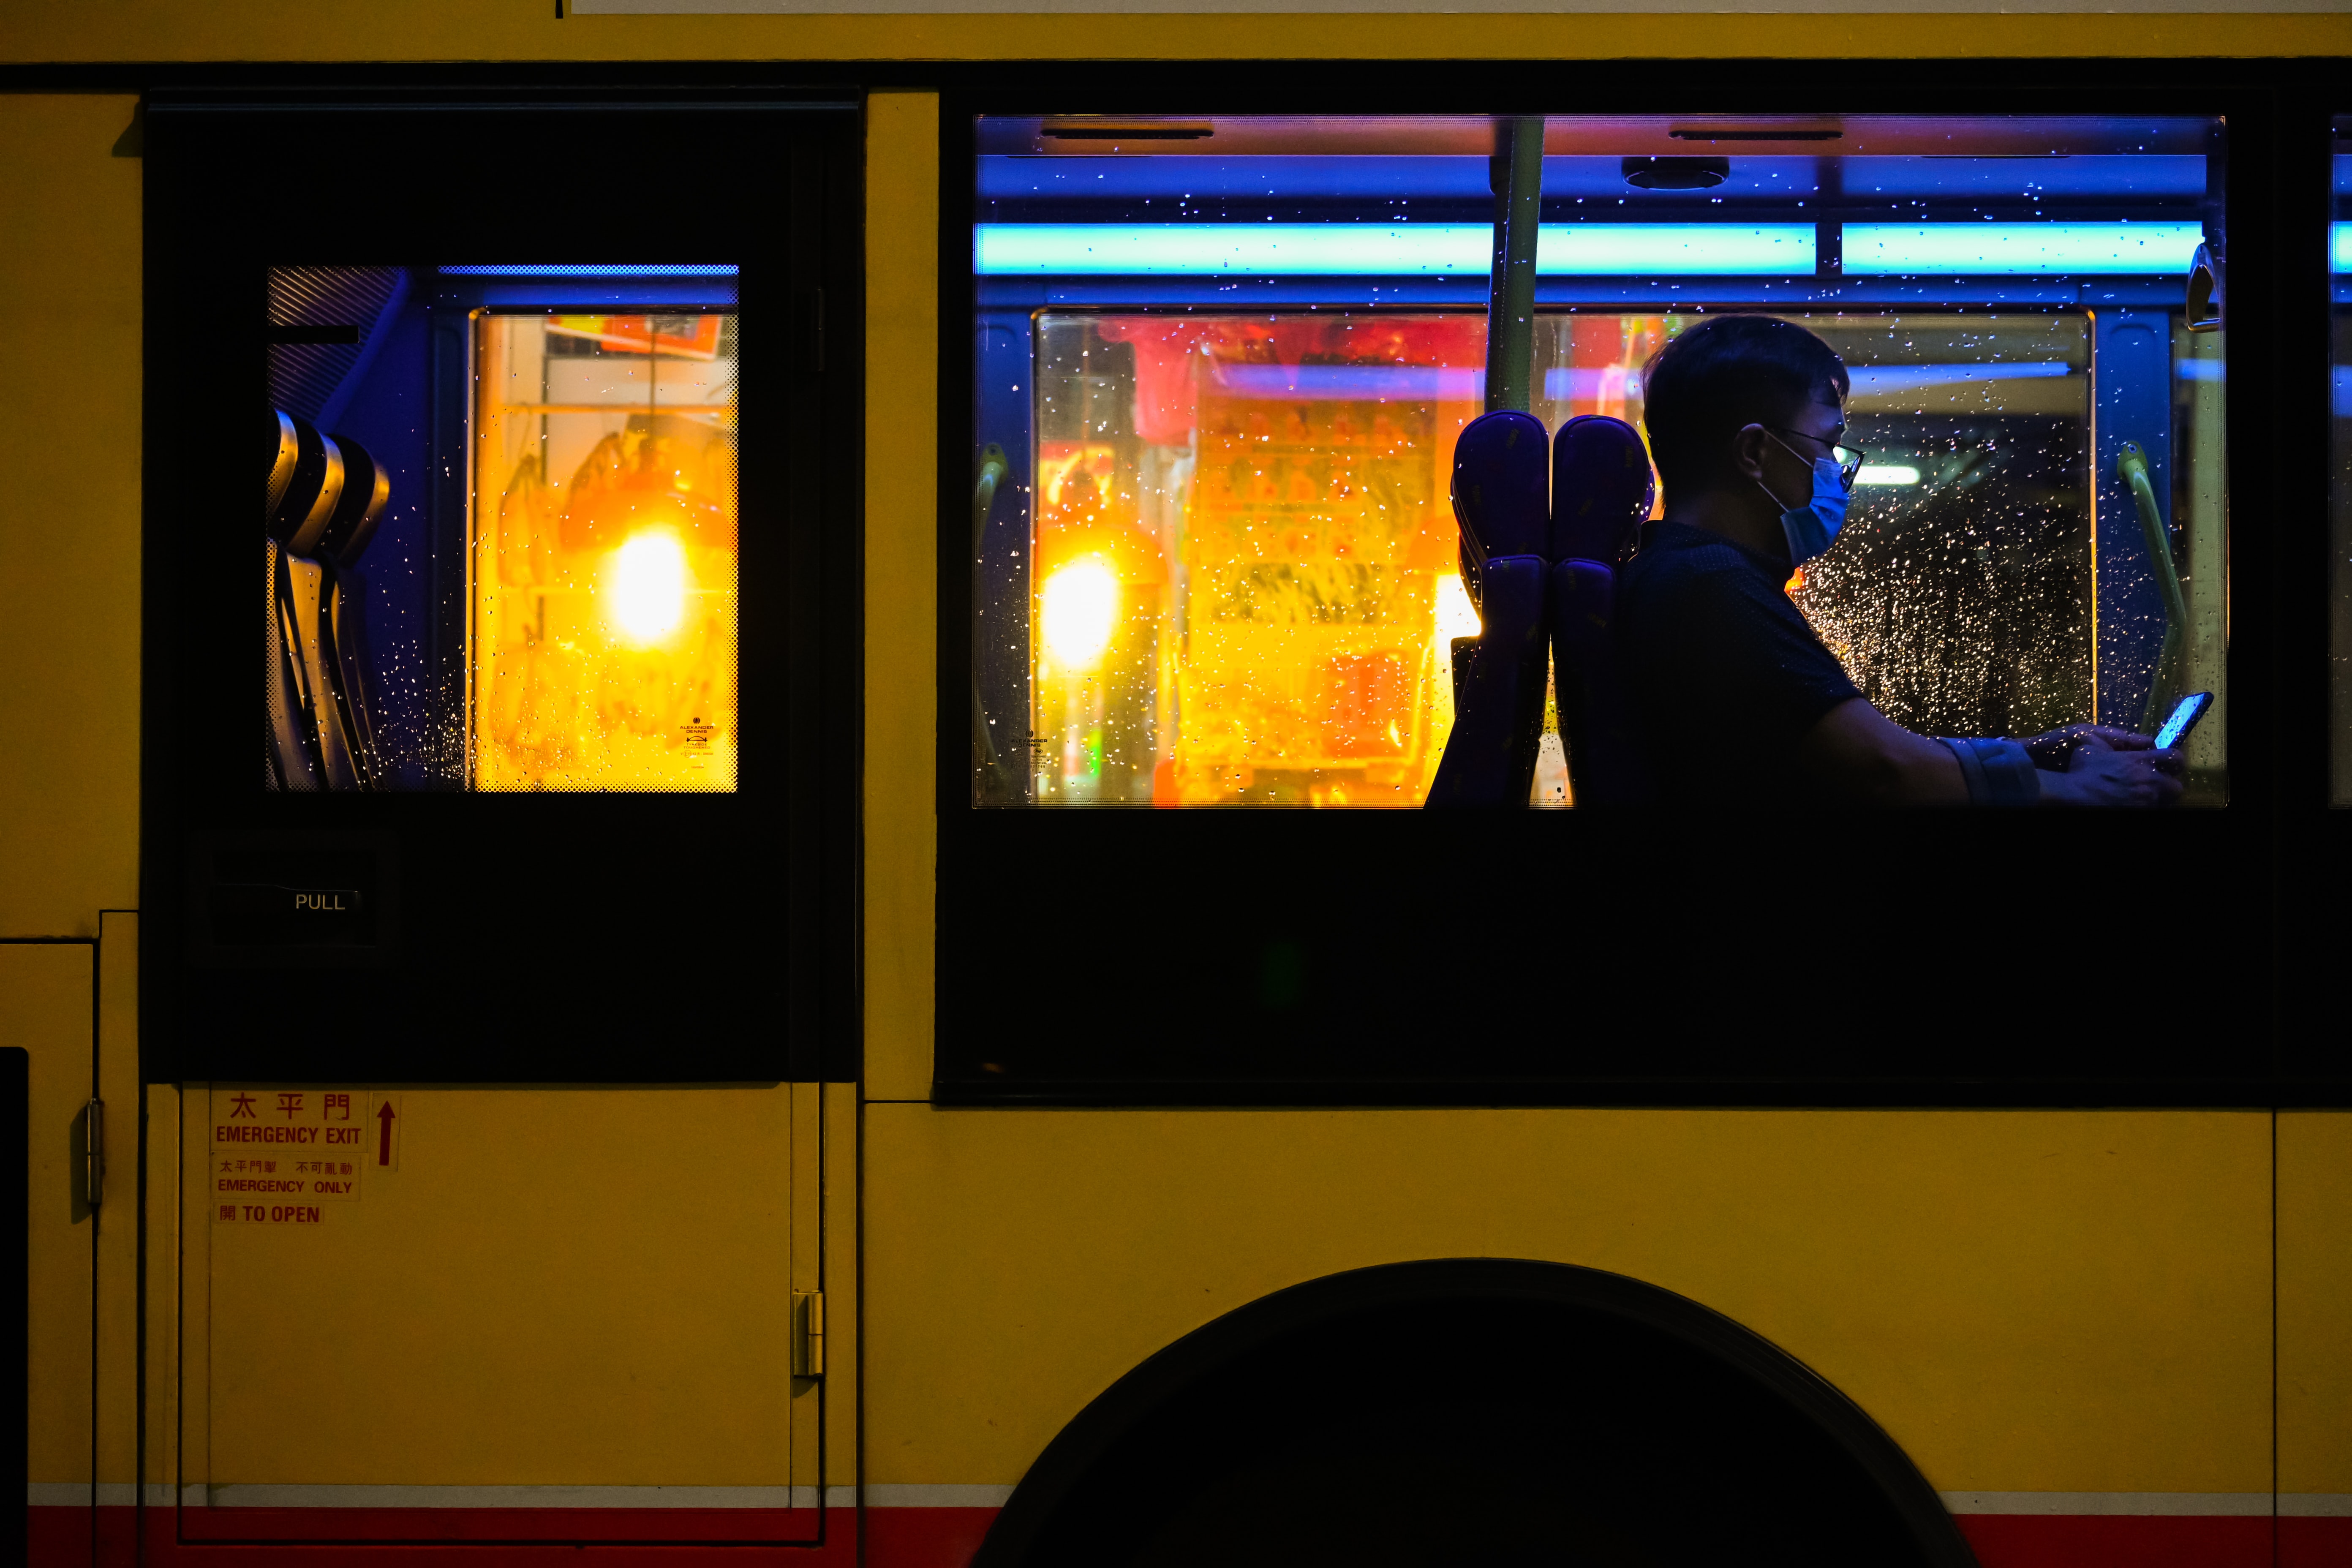 Man on bus at night; image by Drown in City, via Unsplash.com.